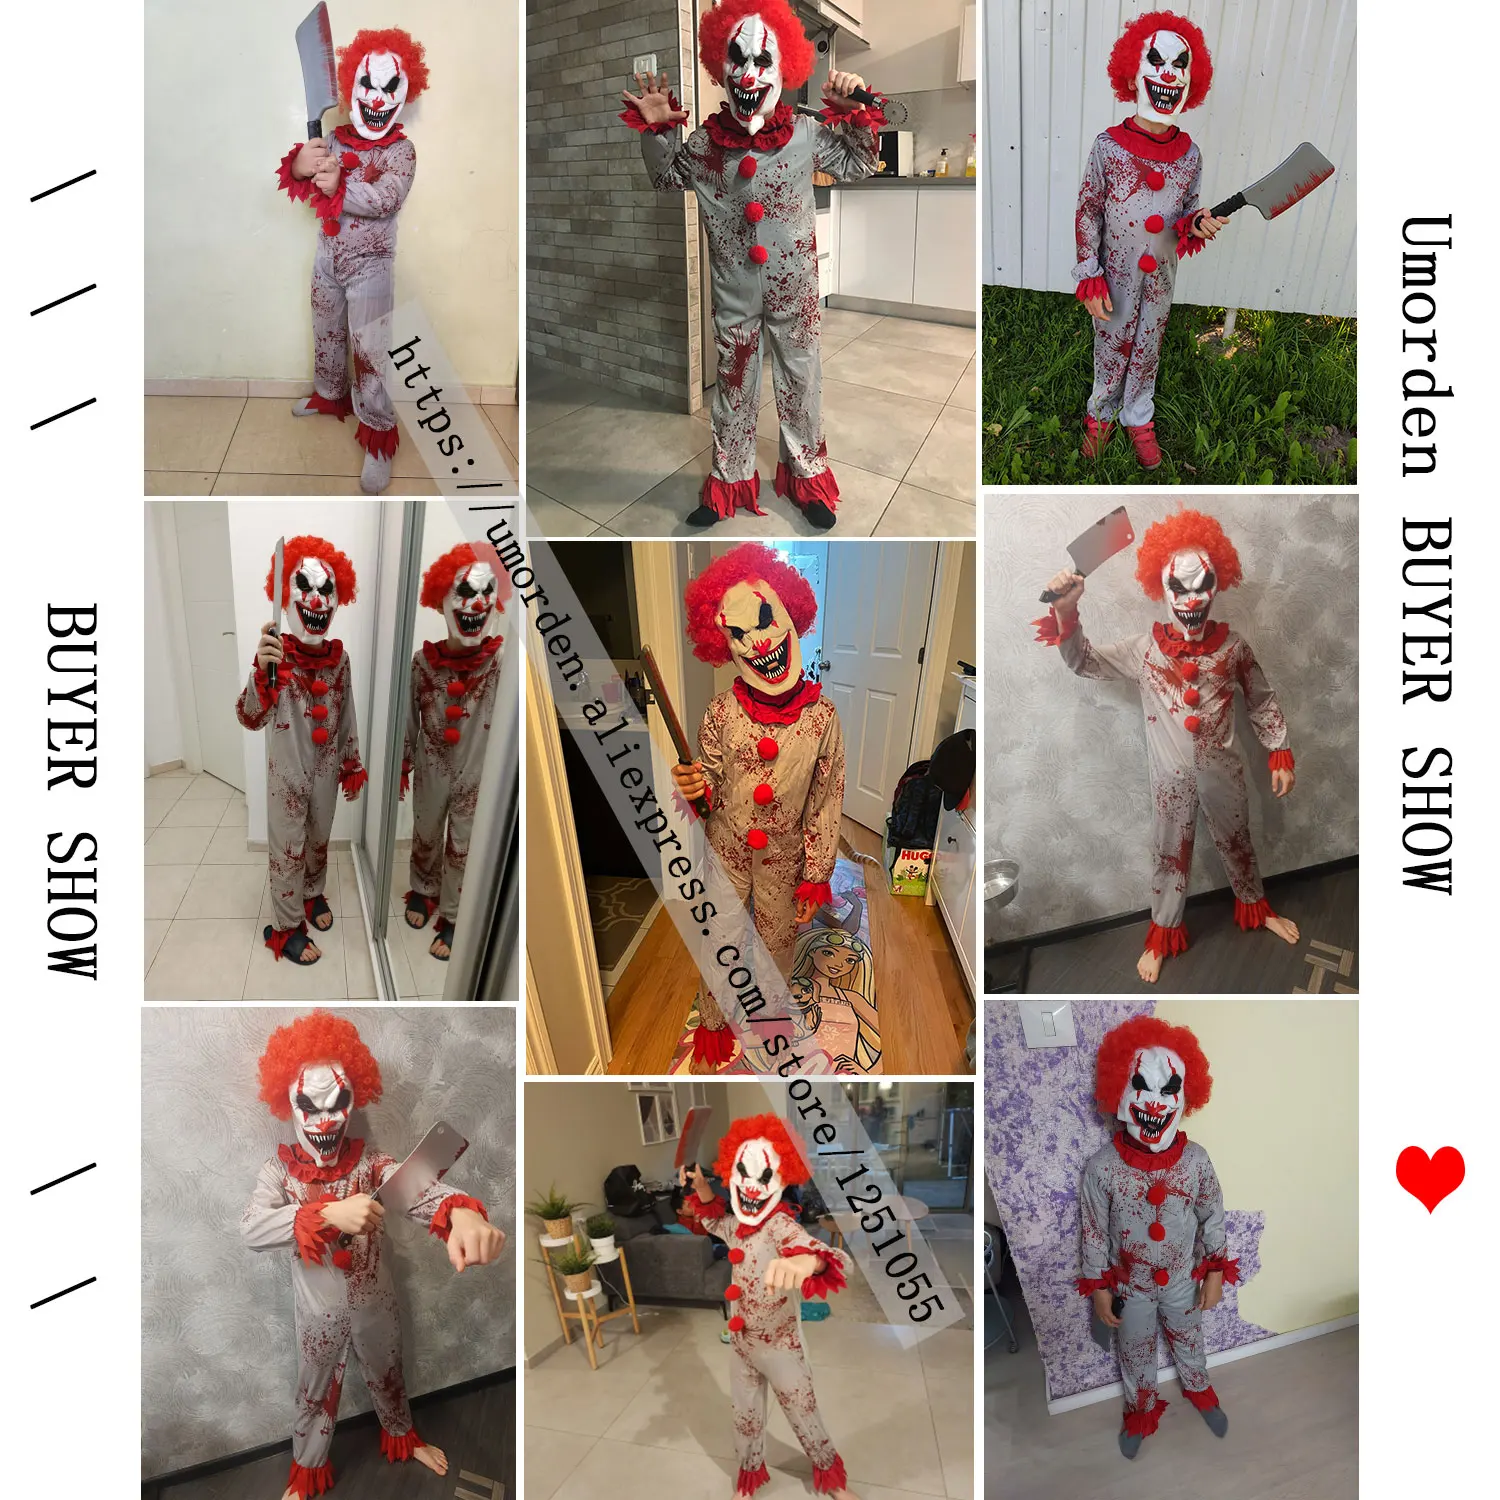 Umorden Fantasia Purim Halloween Costumes for Child Kids Boys Scary Creepy Bloody Killer Circus Clown Jester Costume Cosplay images - 6